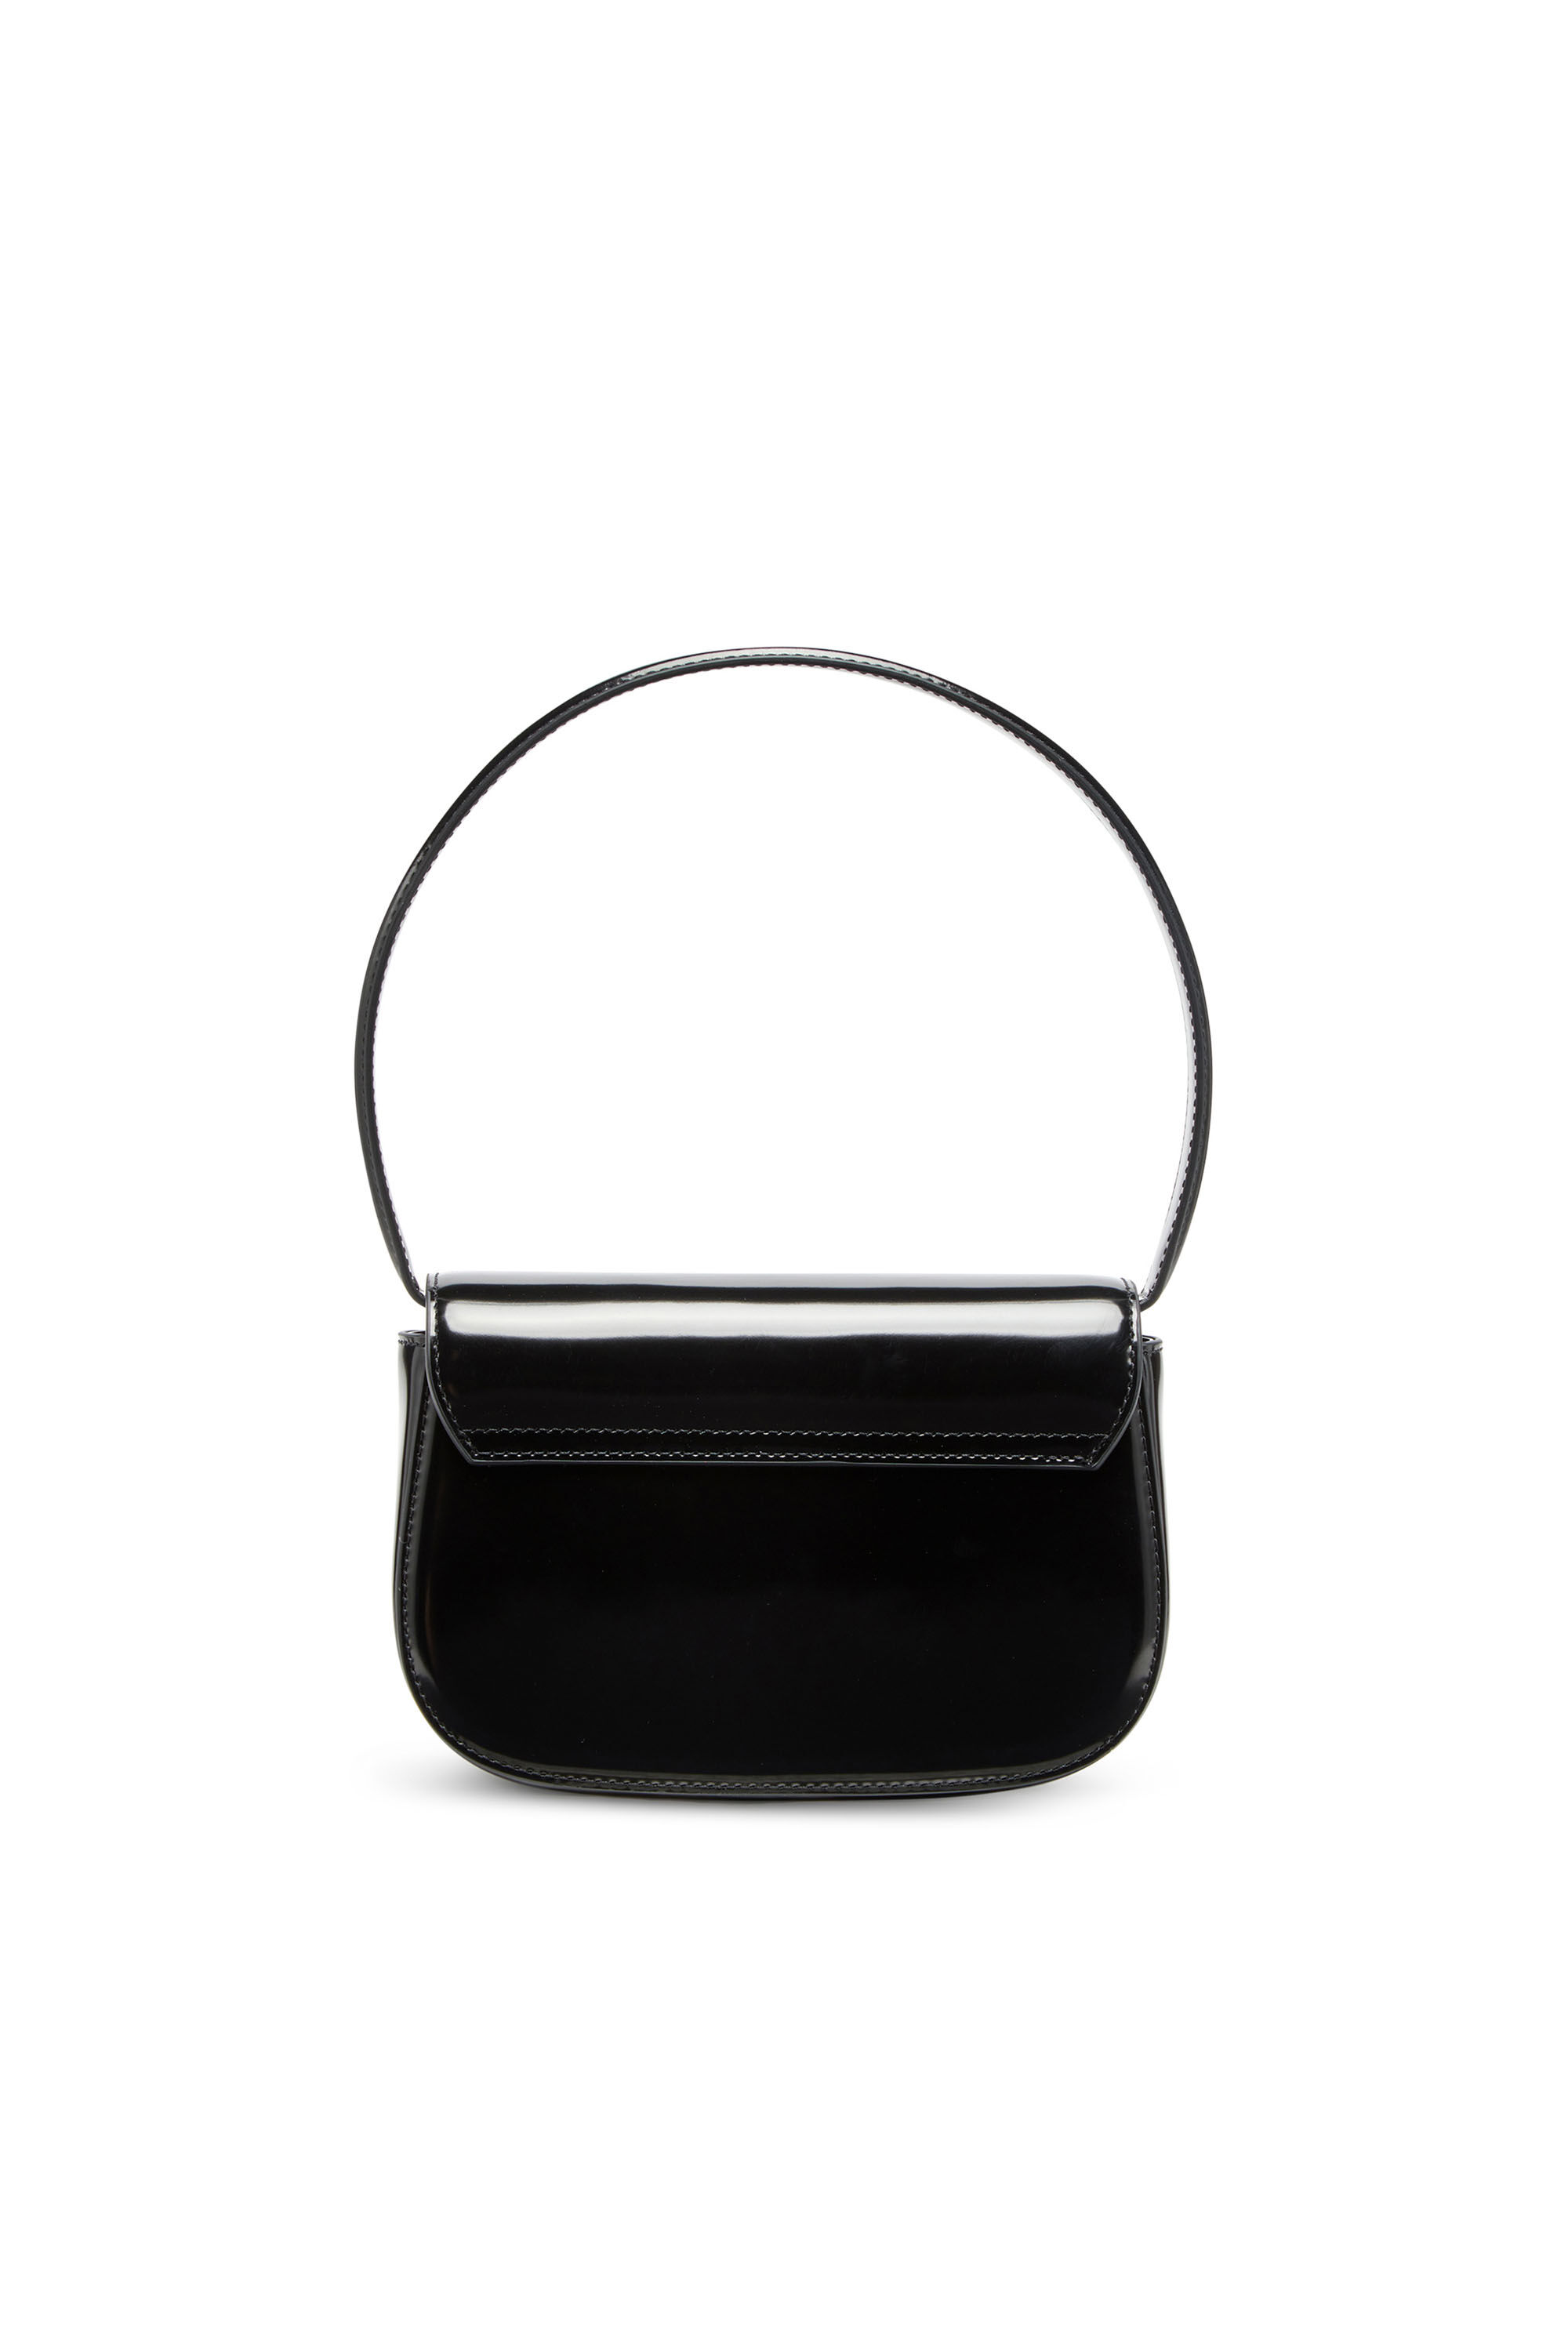 Diesel - 1DR, Woman 1DR-Iconic shoulder bag in mirrored leather in Black - Image 3